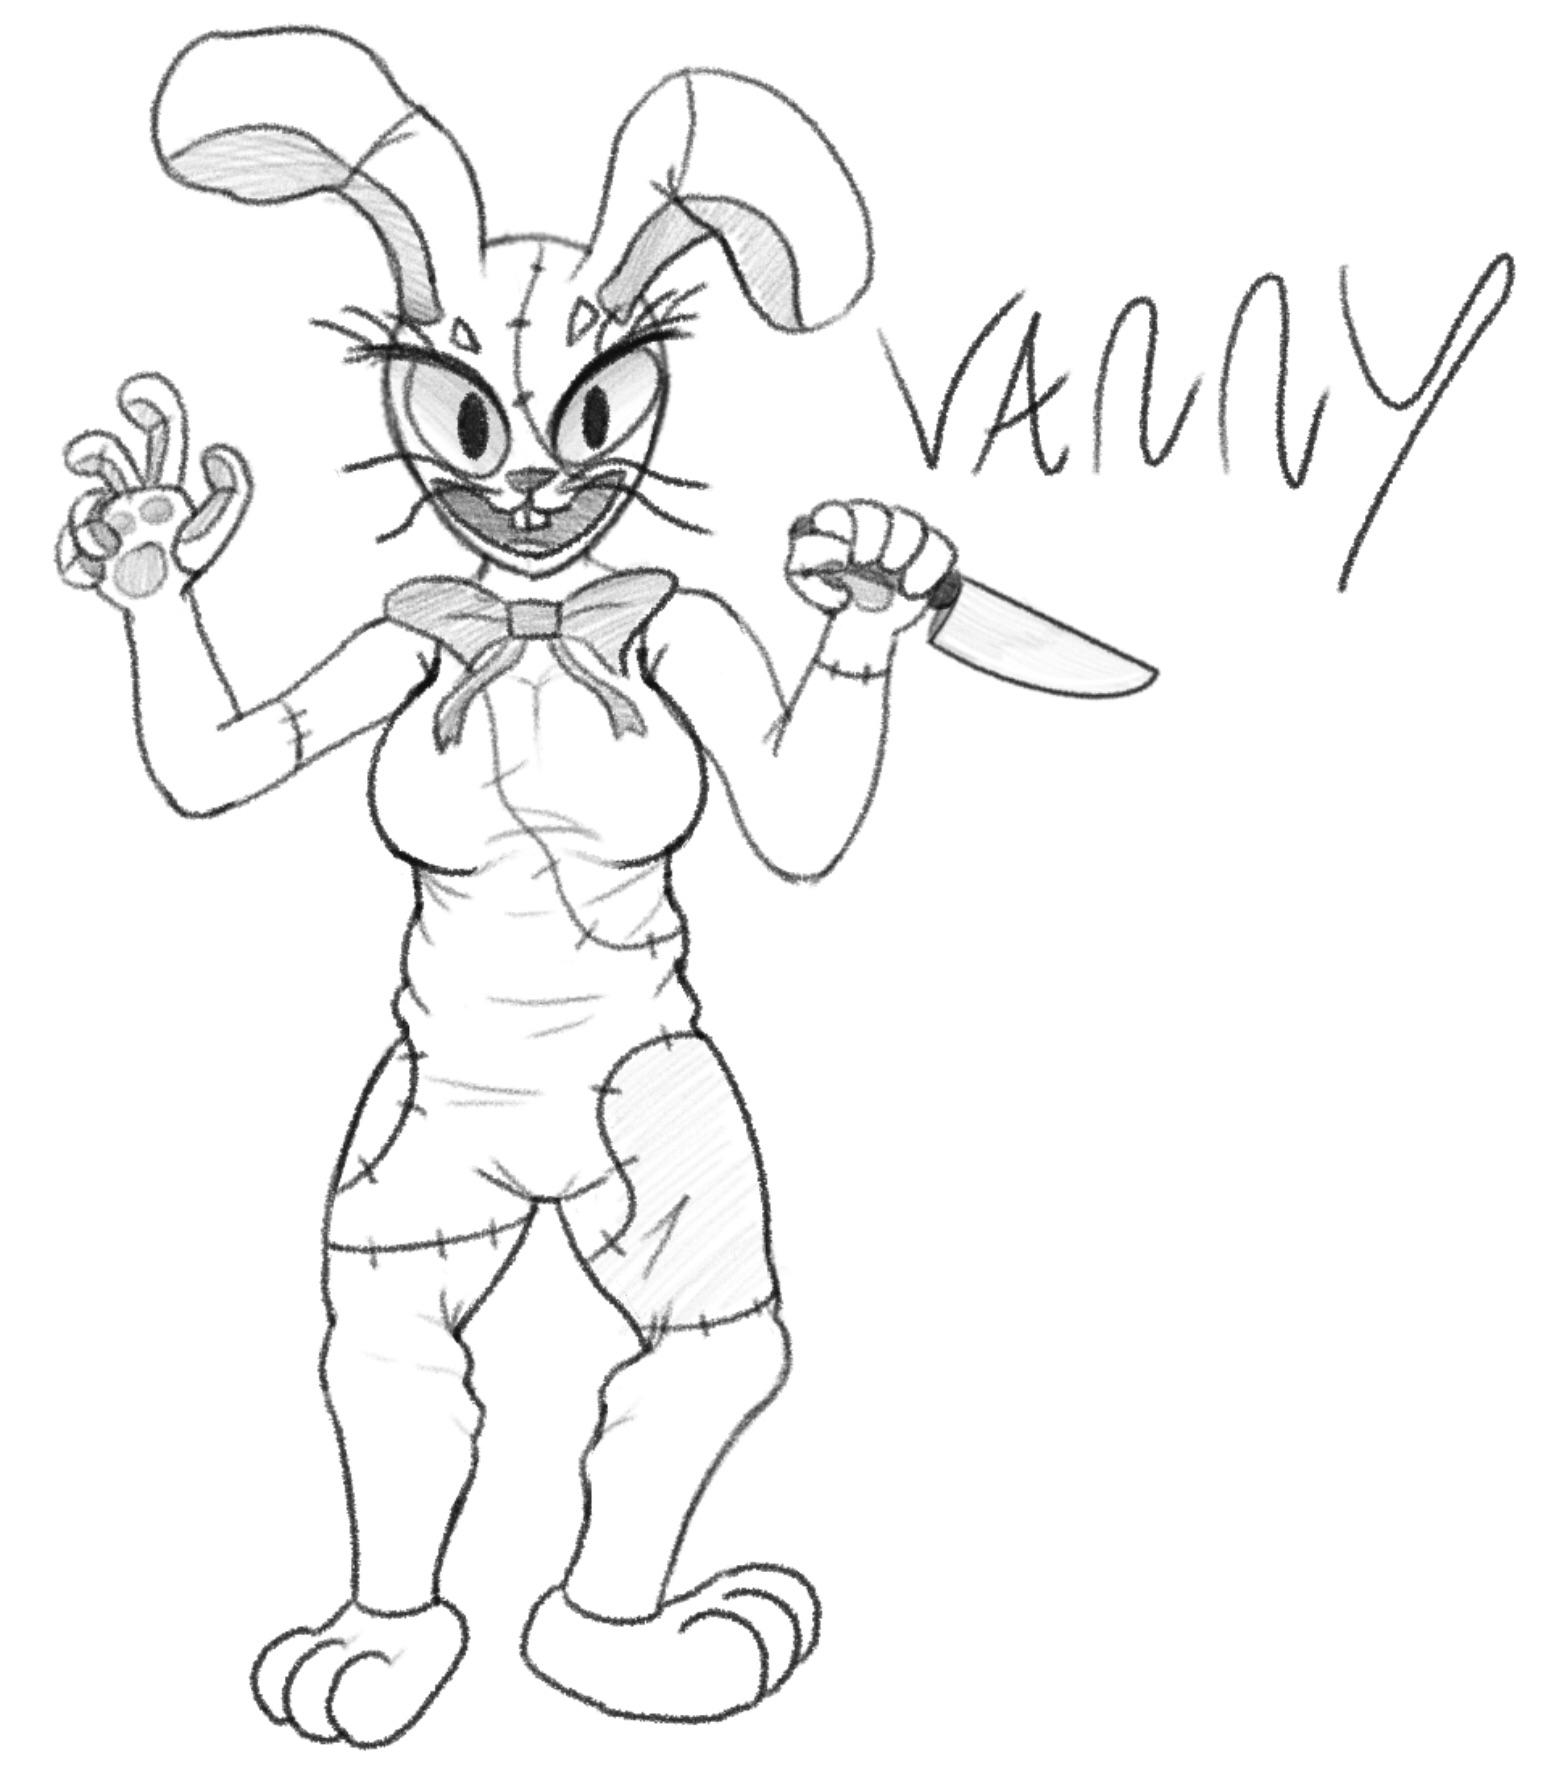 Just did a quick first sketch of vanny, nothin crazy : r/fivenightsatfreddys